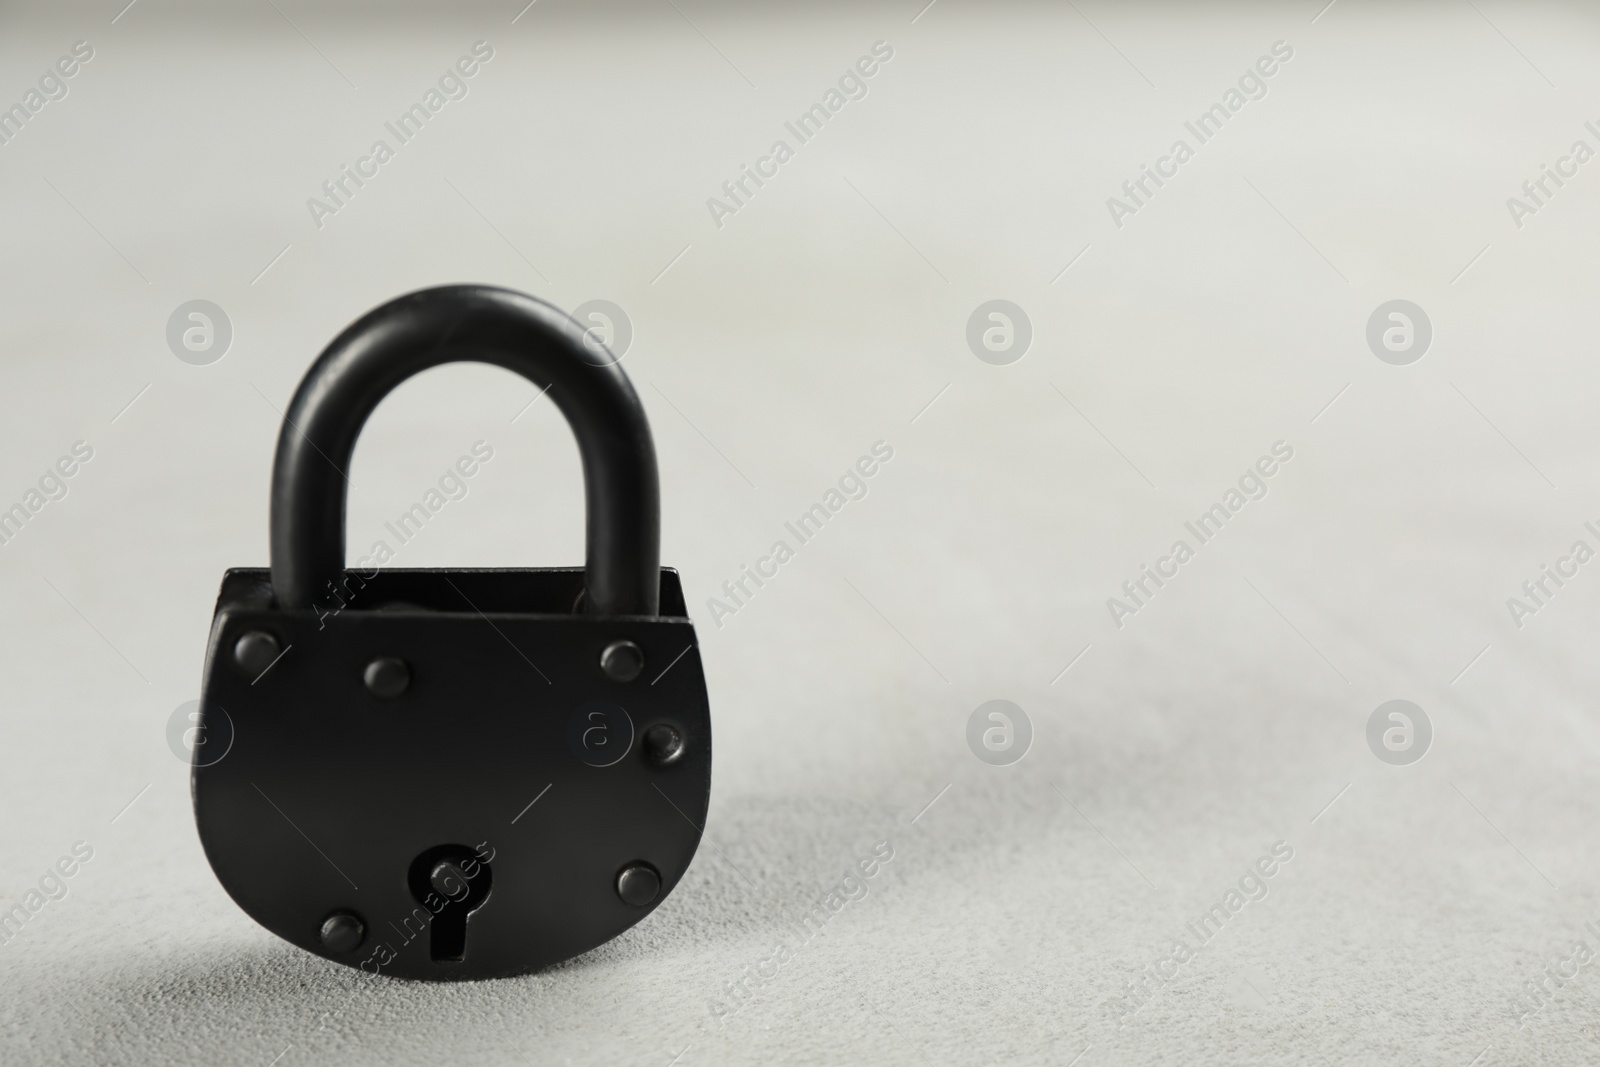 Photo of Vintage padlock on light table. Space for text